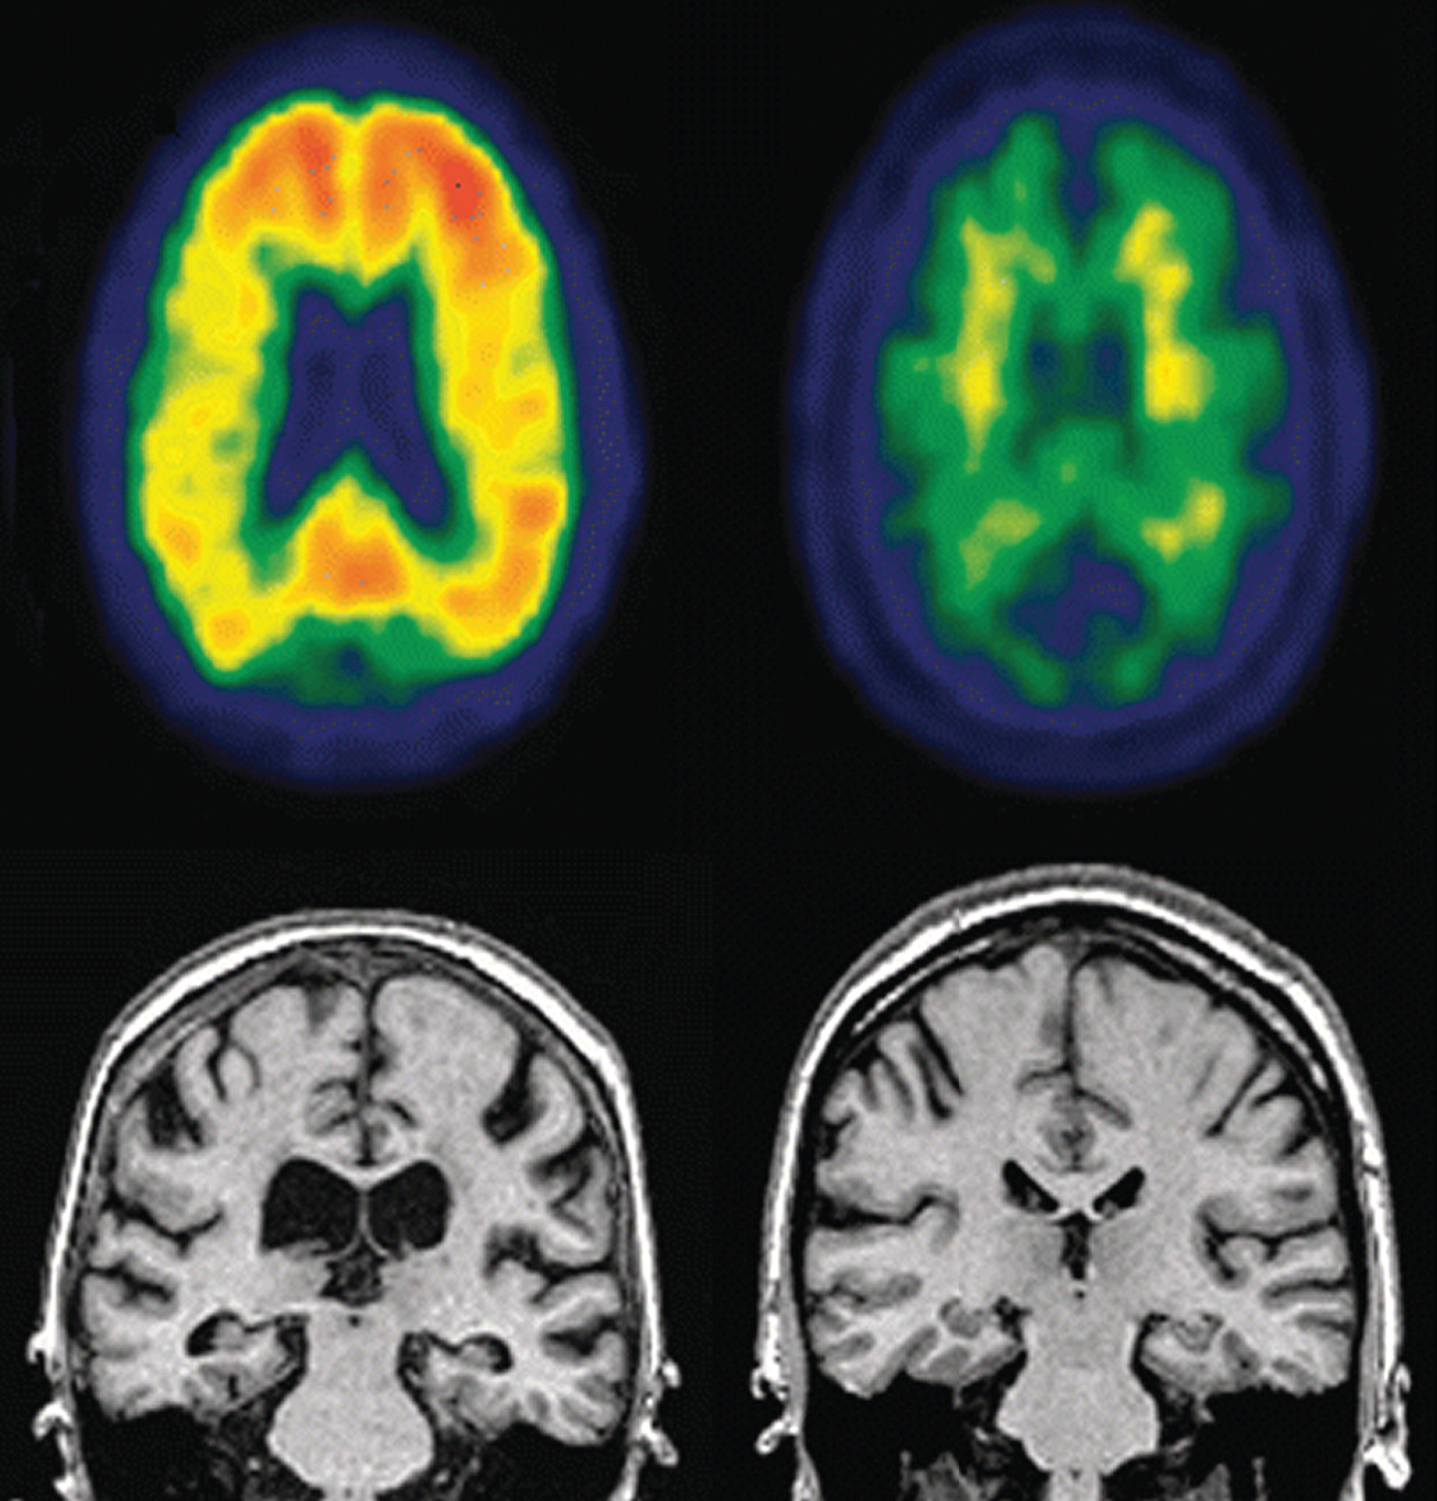 Representative PET (top row) and MRI (bottom row) images of an MCI individual that progressed to AD dementia (left) compared to an MCI individual who did not progress to AD dementia. Notice increased amyloid loading and hippocampal atrophy in the PET images and ventricular enlargement in the MRI images in progressor individual (left). Image reprinted with permissionfrom [55].